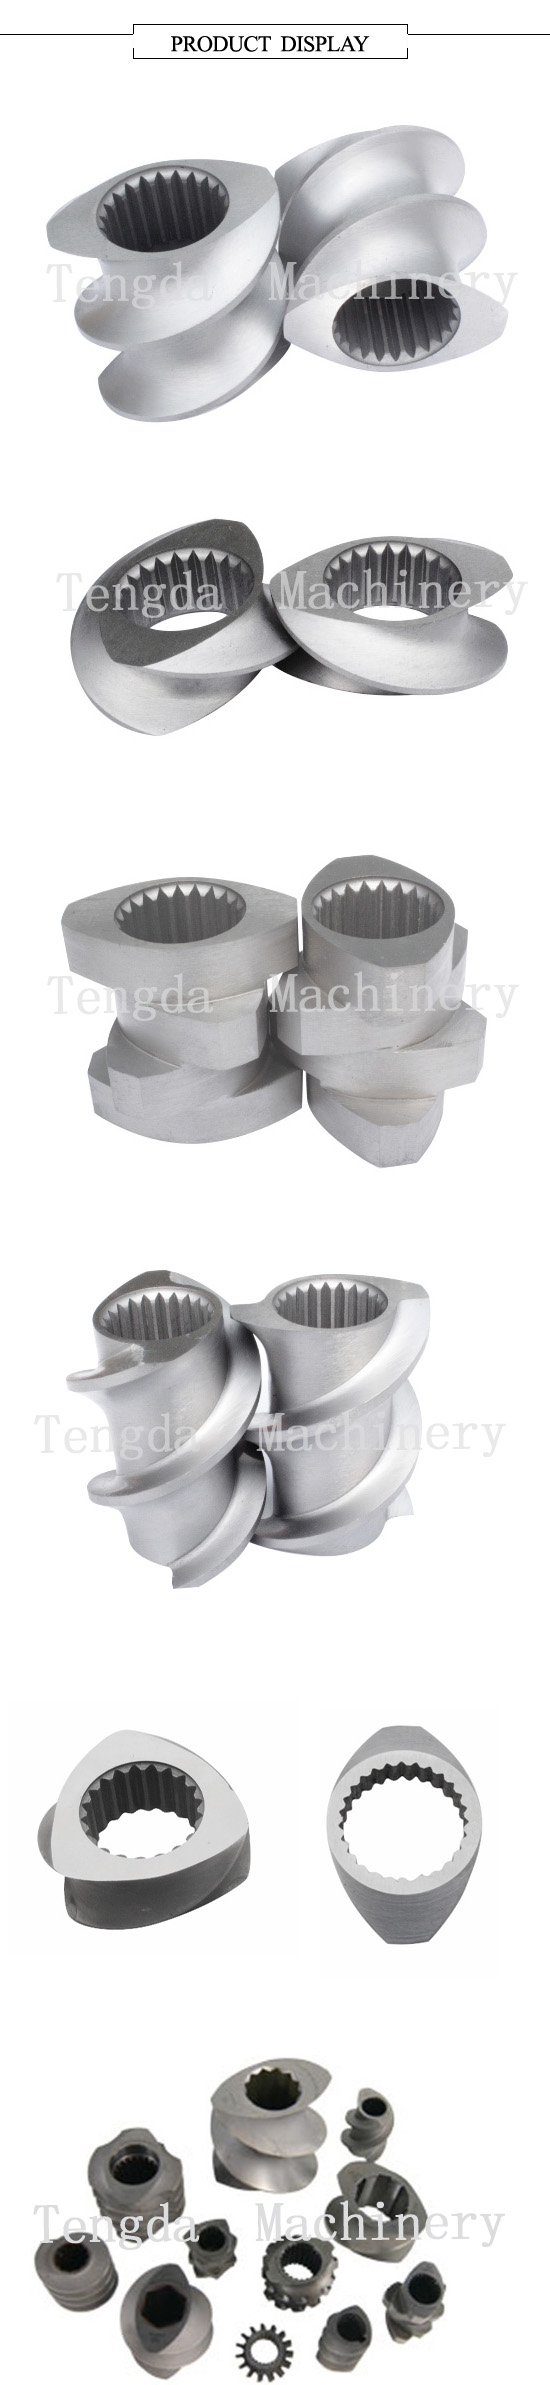 Screw Element Stainless Steel Material for Screw Extruder